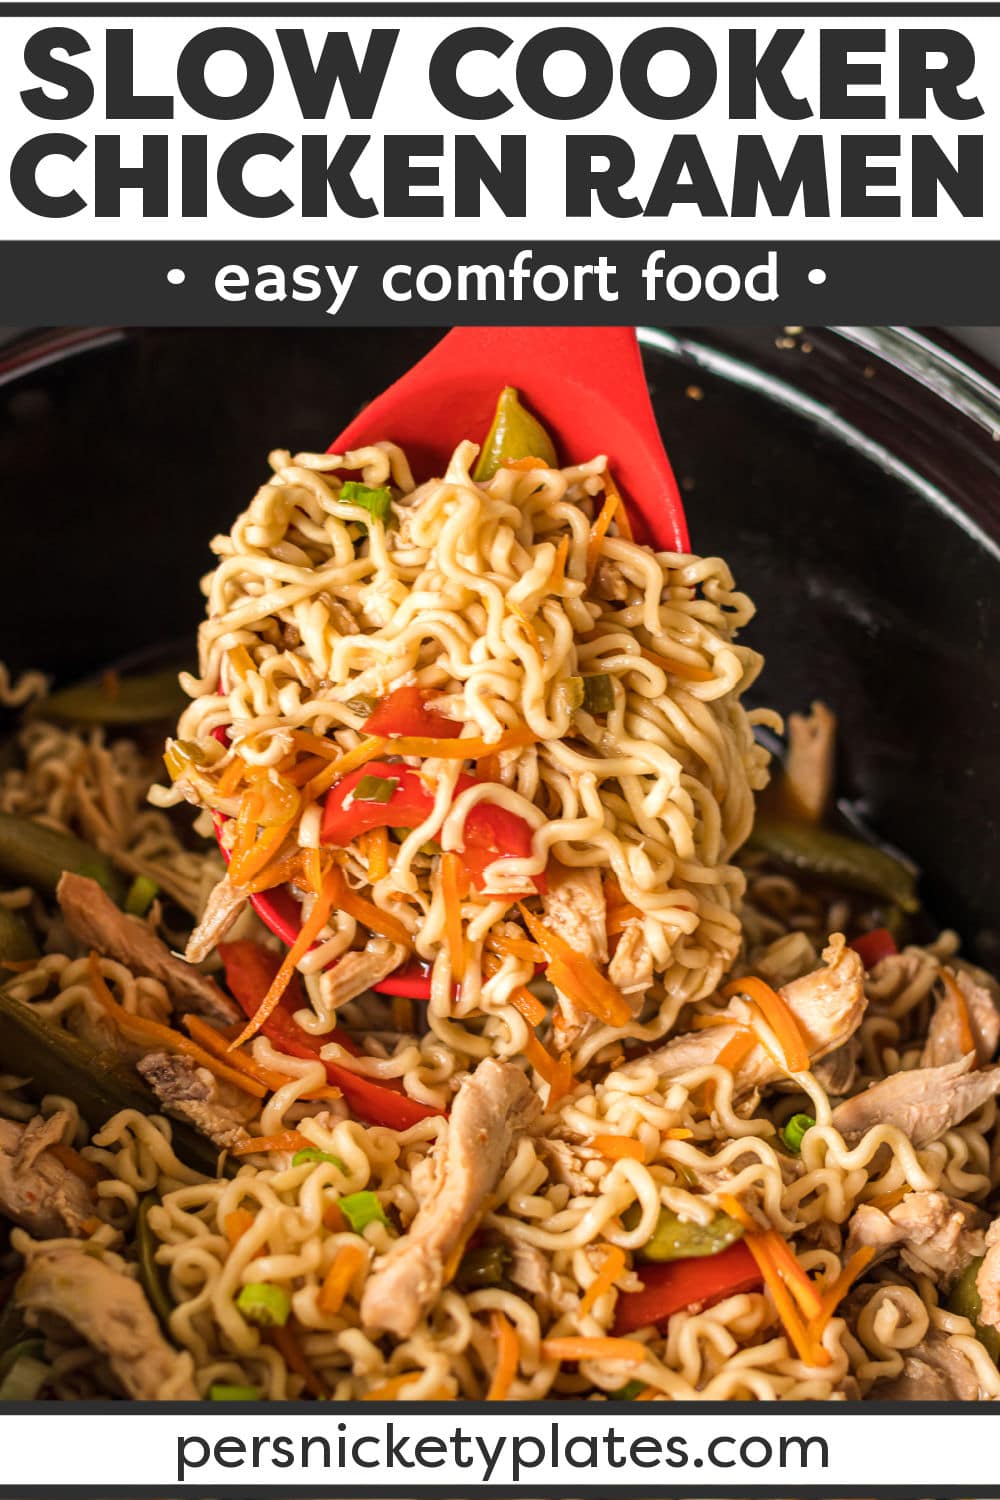 Slow Cooker Chicken Ramen is a light, yet hearty noodle dish made in the crockpot using budget-friendly ingredients and a ton of flavor! It's made with slurpy noodles, chicken, veggies, and a sweet and savory broth that comes together with just 10 minutes of prep time! | www.persnicketyplates.com